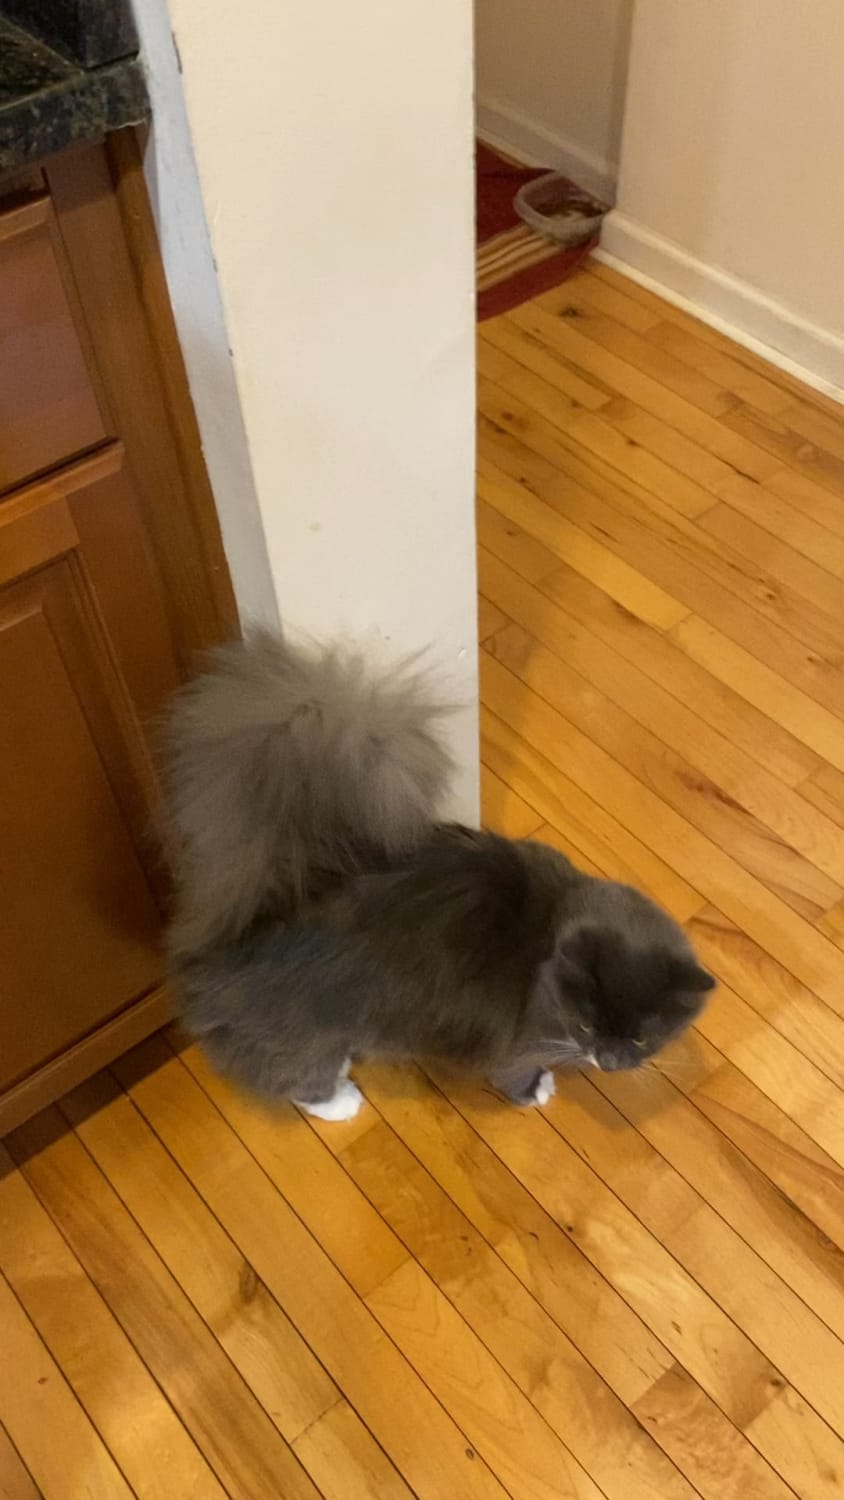 My girlfriend adopted these two from our last litter of foster kittens. I have never seen such fluffy tails, I swear the tails are bigger than the cats.